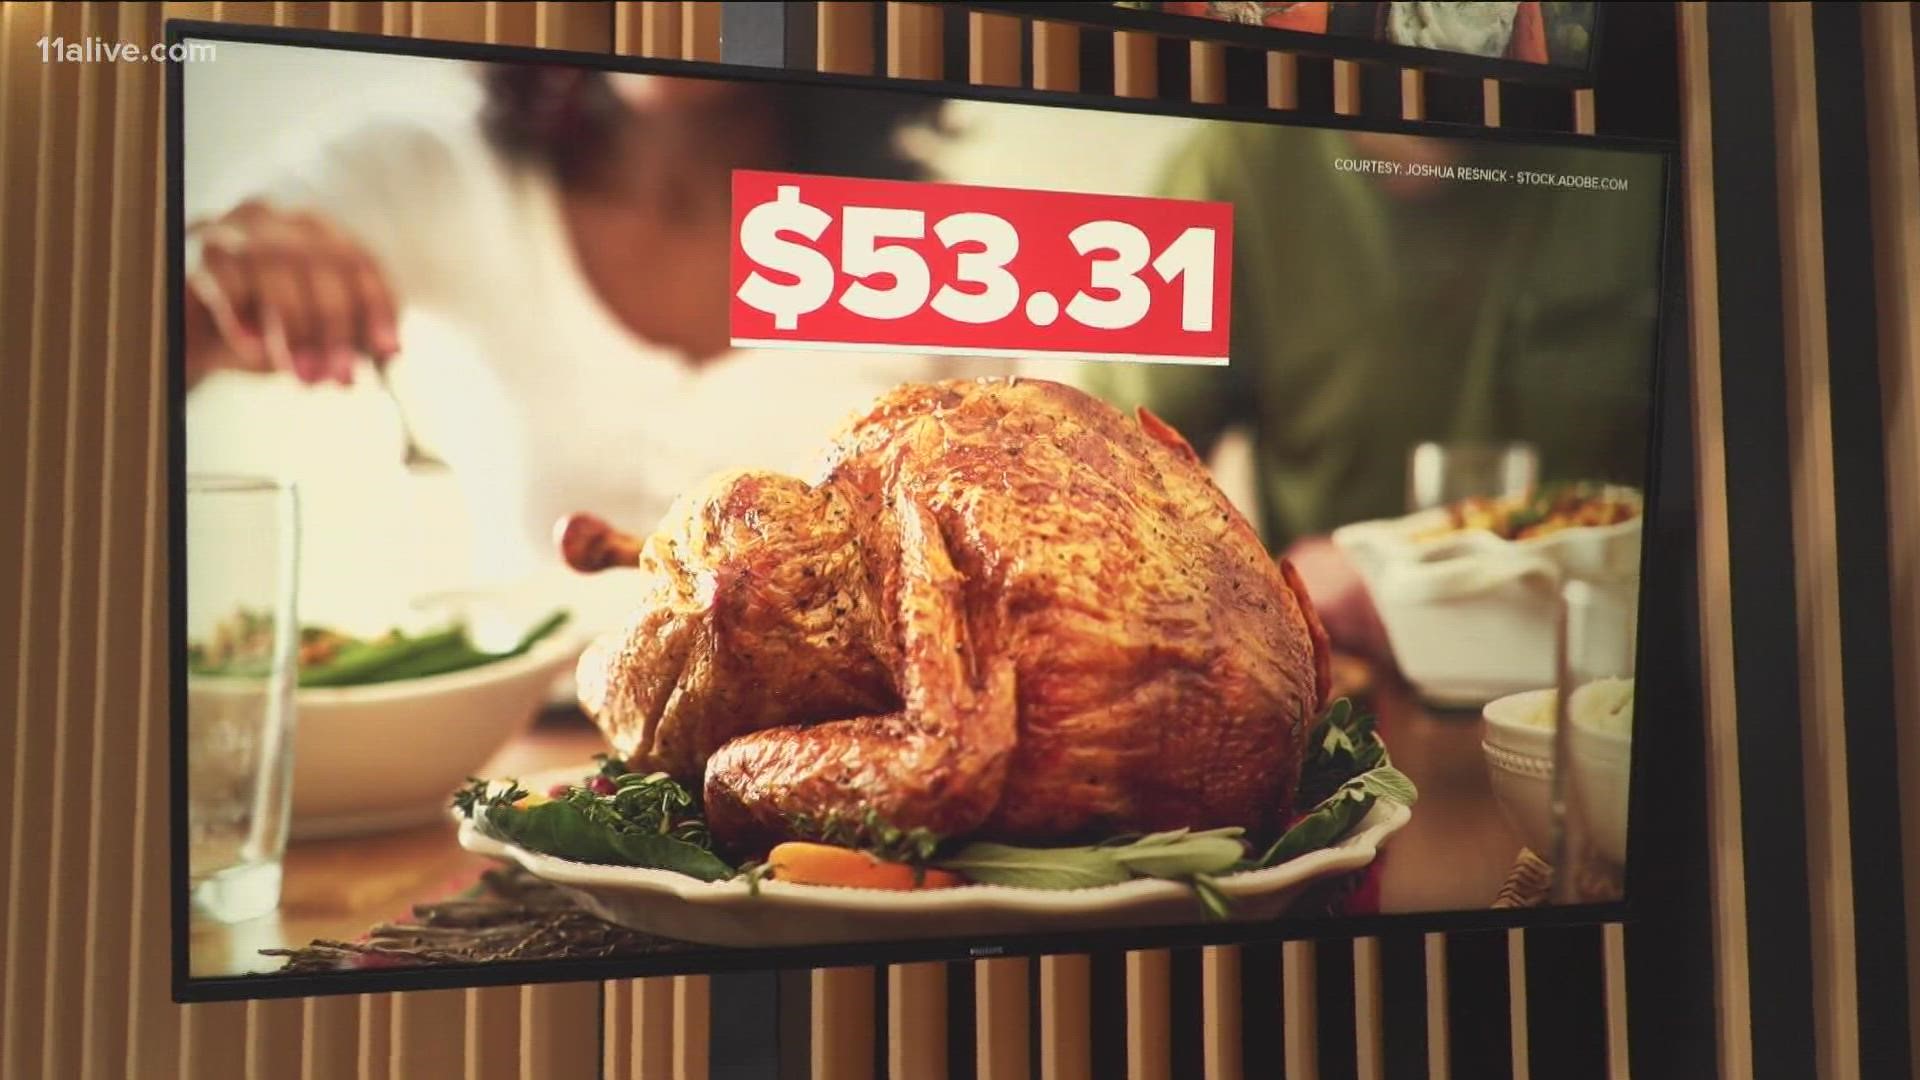 Thanksgiving dinner will cost more than average by a significant amount this year.